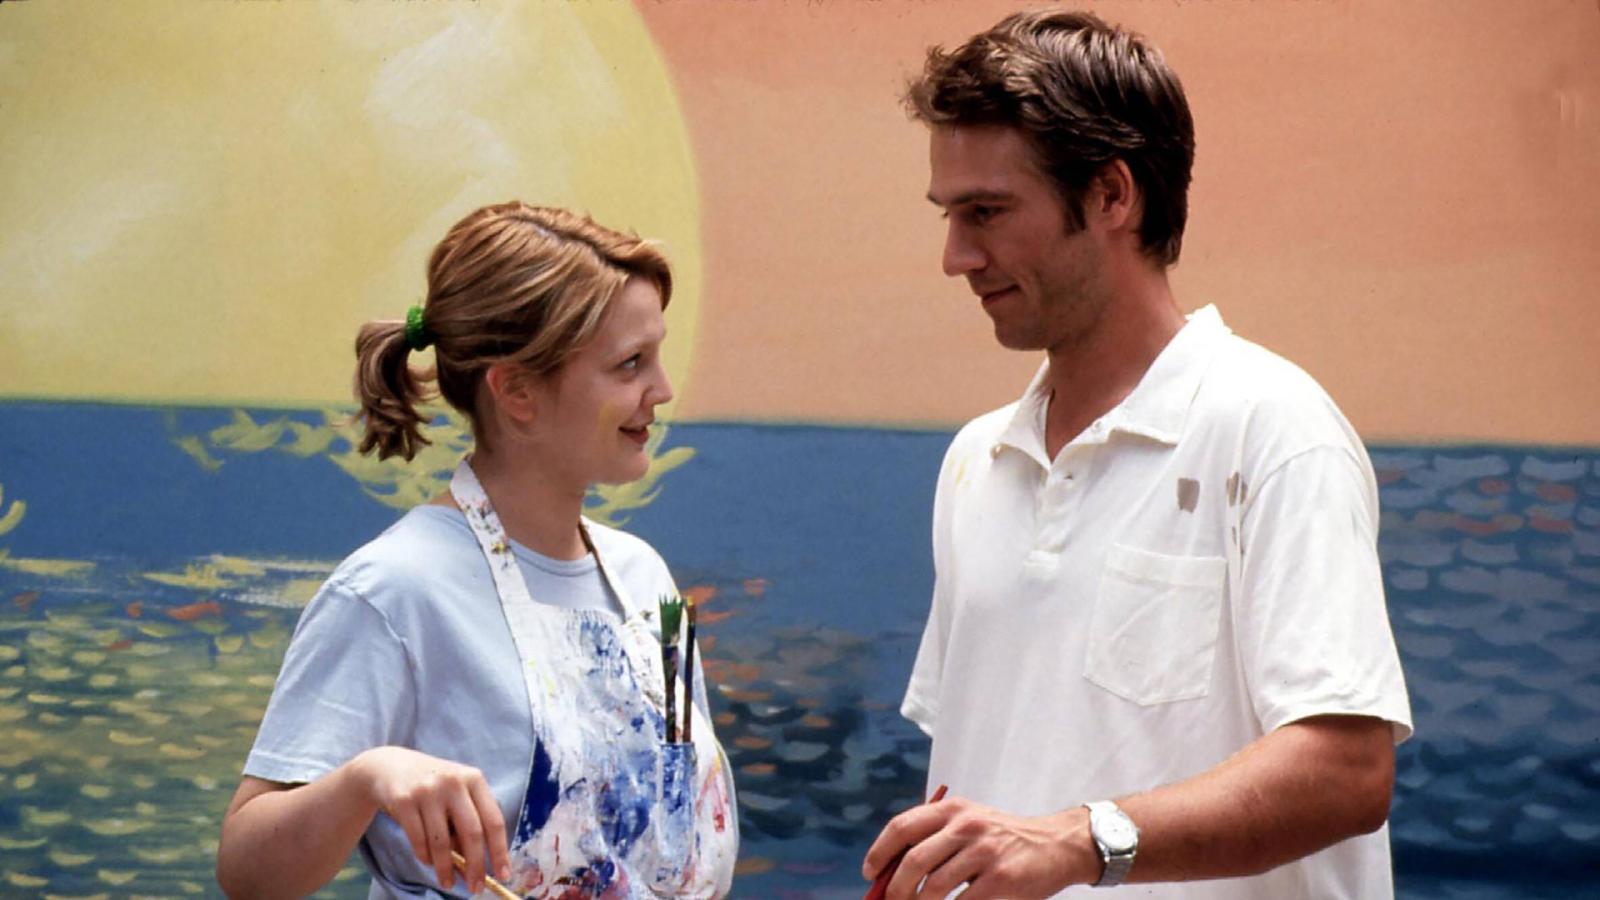 10 Problematic On-Screen Relationships We Had to Endure - image 9